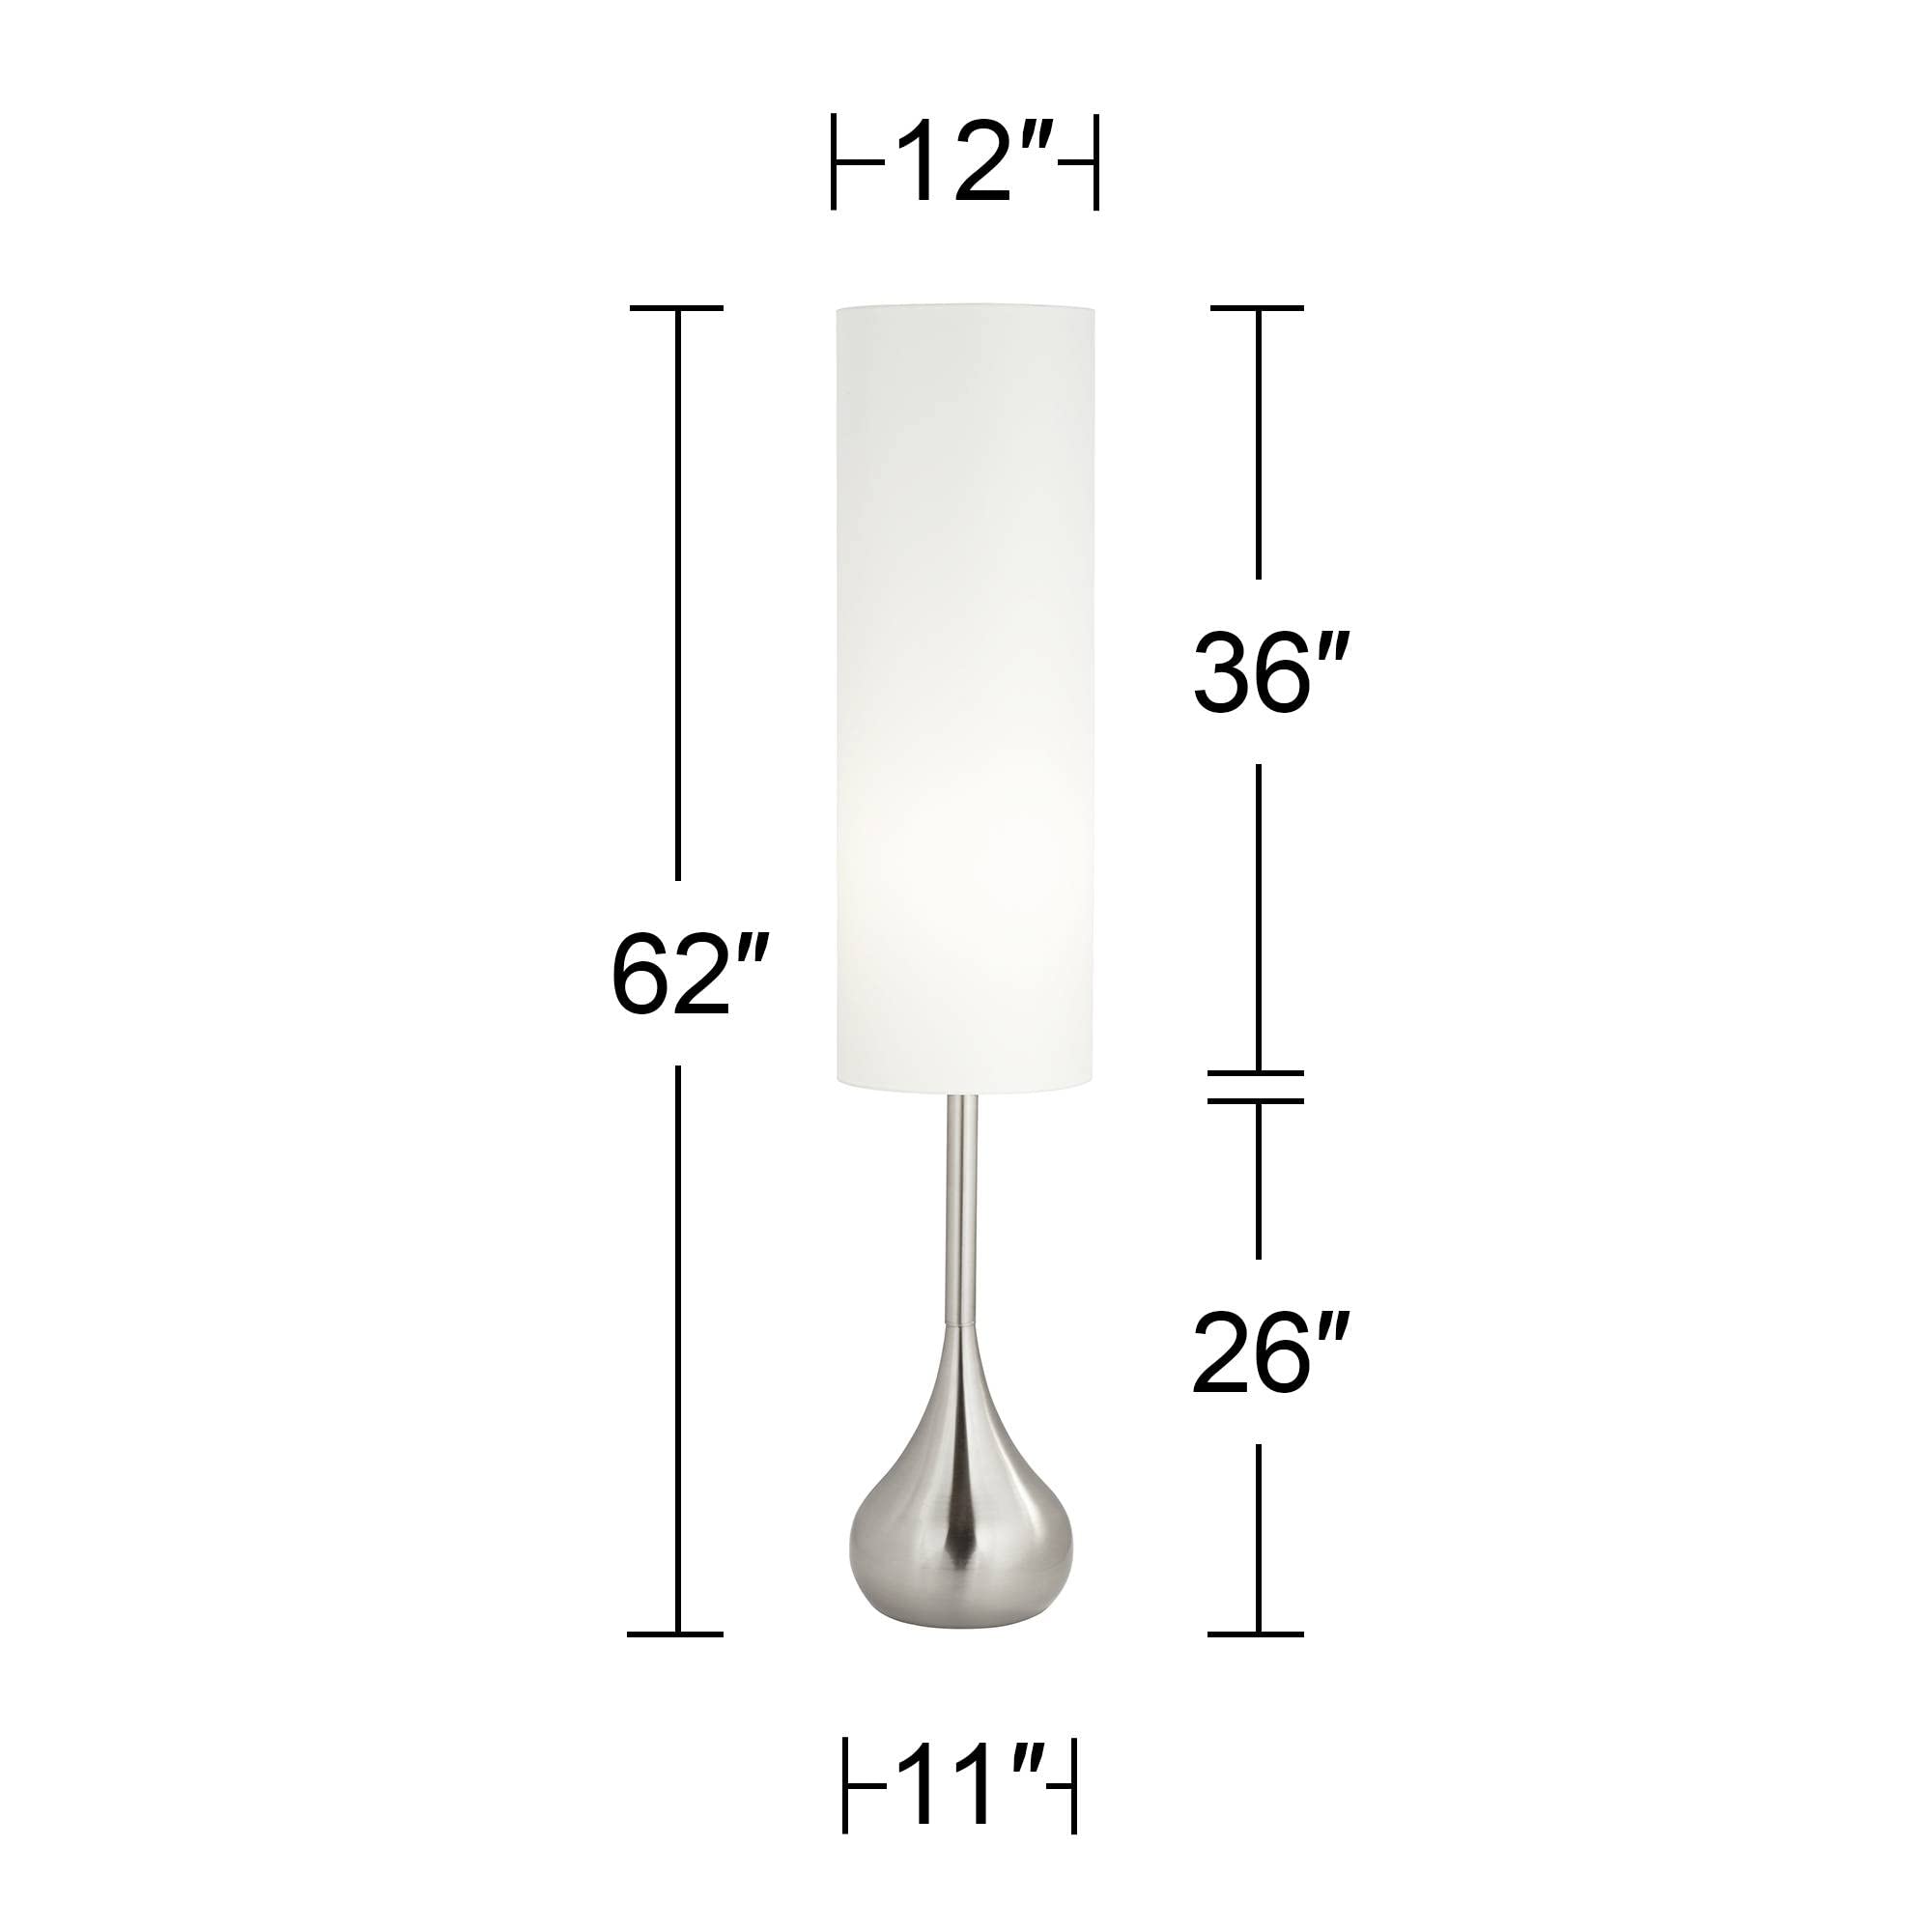 Possini Euro Design Mid Century Modern Retro Floor Lamp Standing 62" Tall Dark Bronze Metal Droplet Off-White Cotton Cylinder Shade Decor for Living Room Reading House Bedroom Home